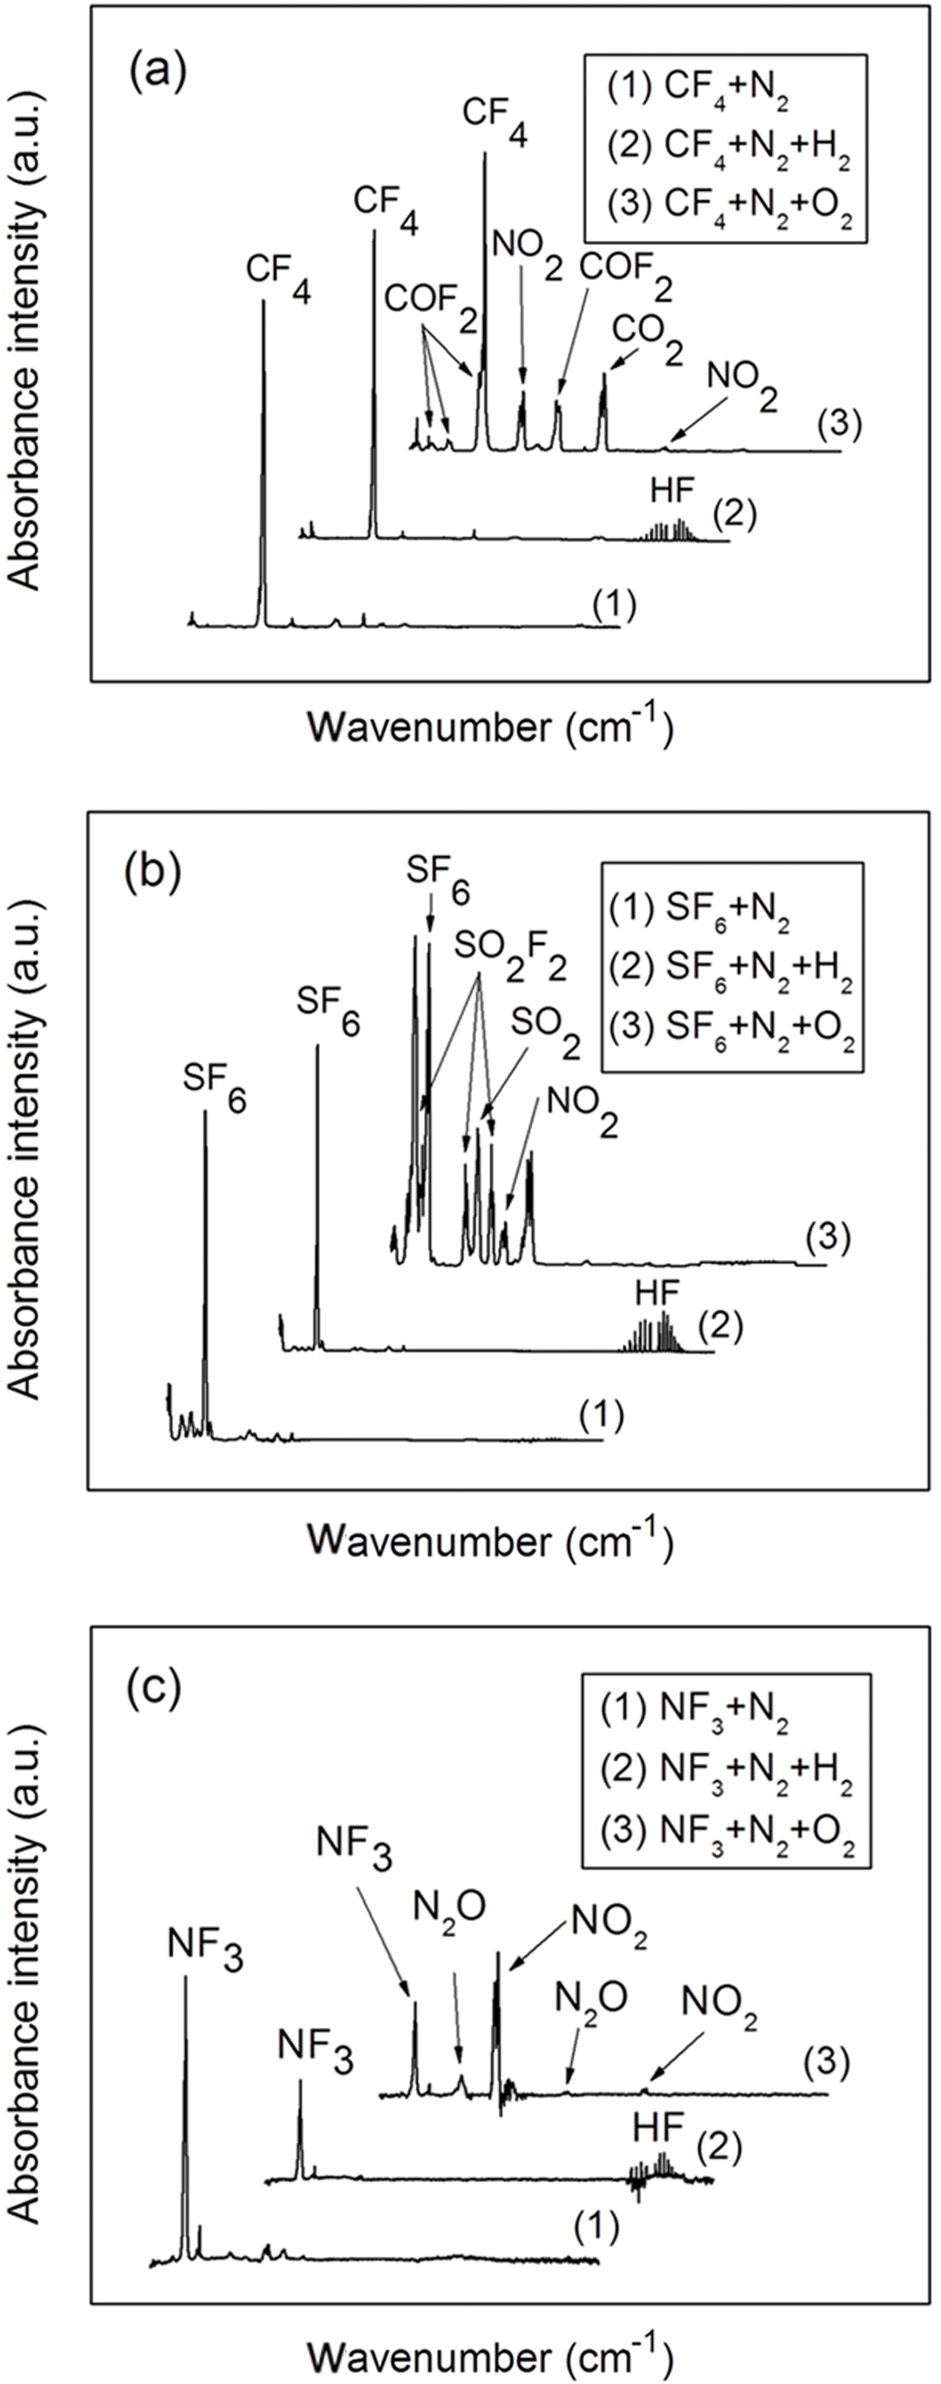 FT-IR spectra after plasma treatment of PFCs in different working gas conditions at the fixed input power of 3 kW and the waste gas flow rate of 100 L/min: (a) CF4, (b) SF6, (c) NF3.